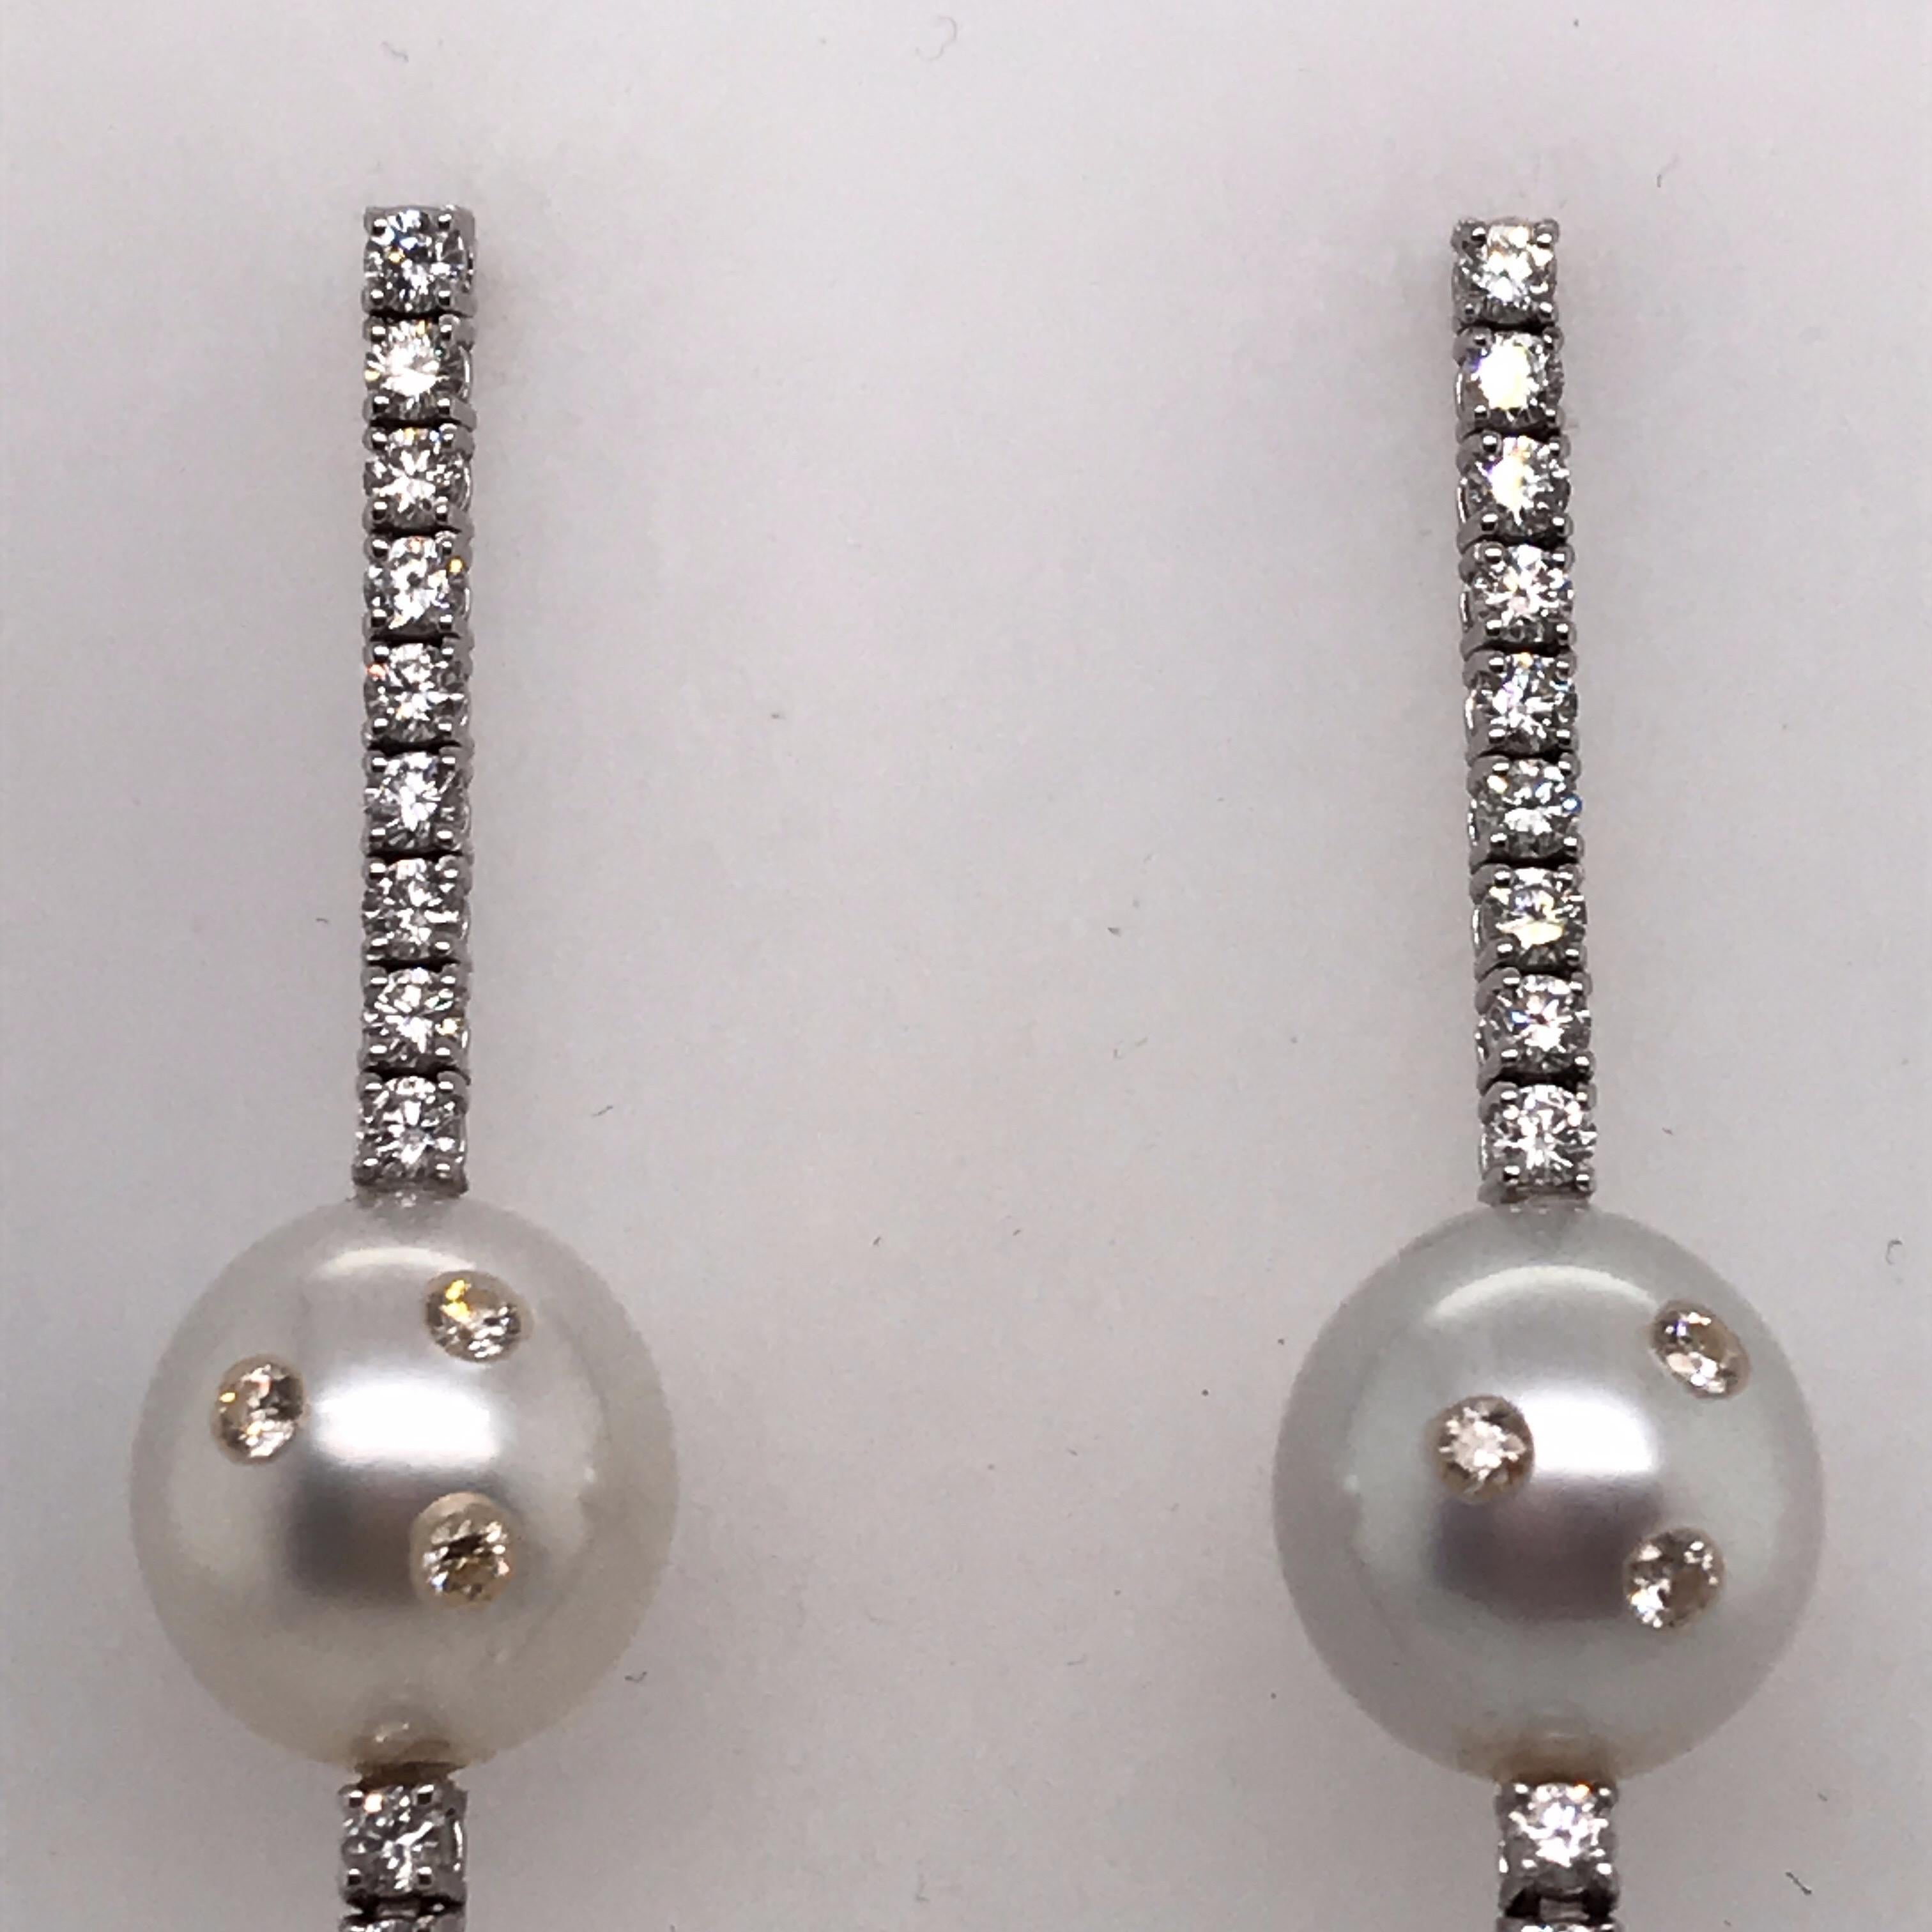 14K White gold drop earrings featuring four South Sea Pearls measuring 12-16 mm with 16 diamonds on the pearls and 38 round brilliants the weighing 2.30 carats.
Color G-H
Clarity SI